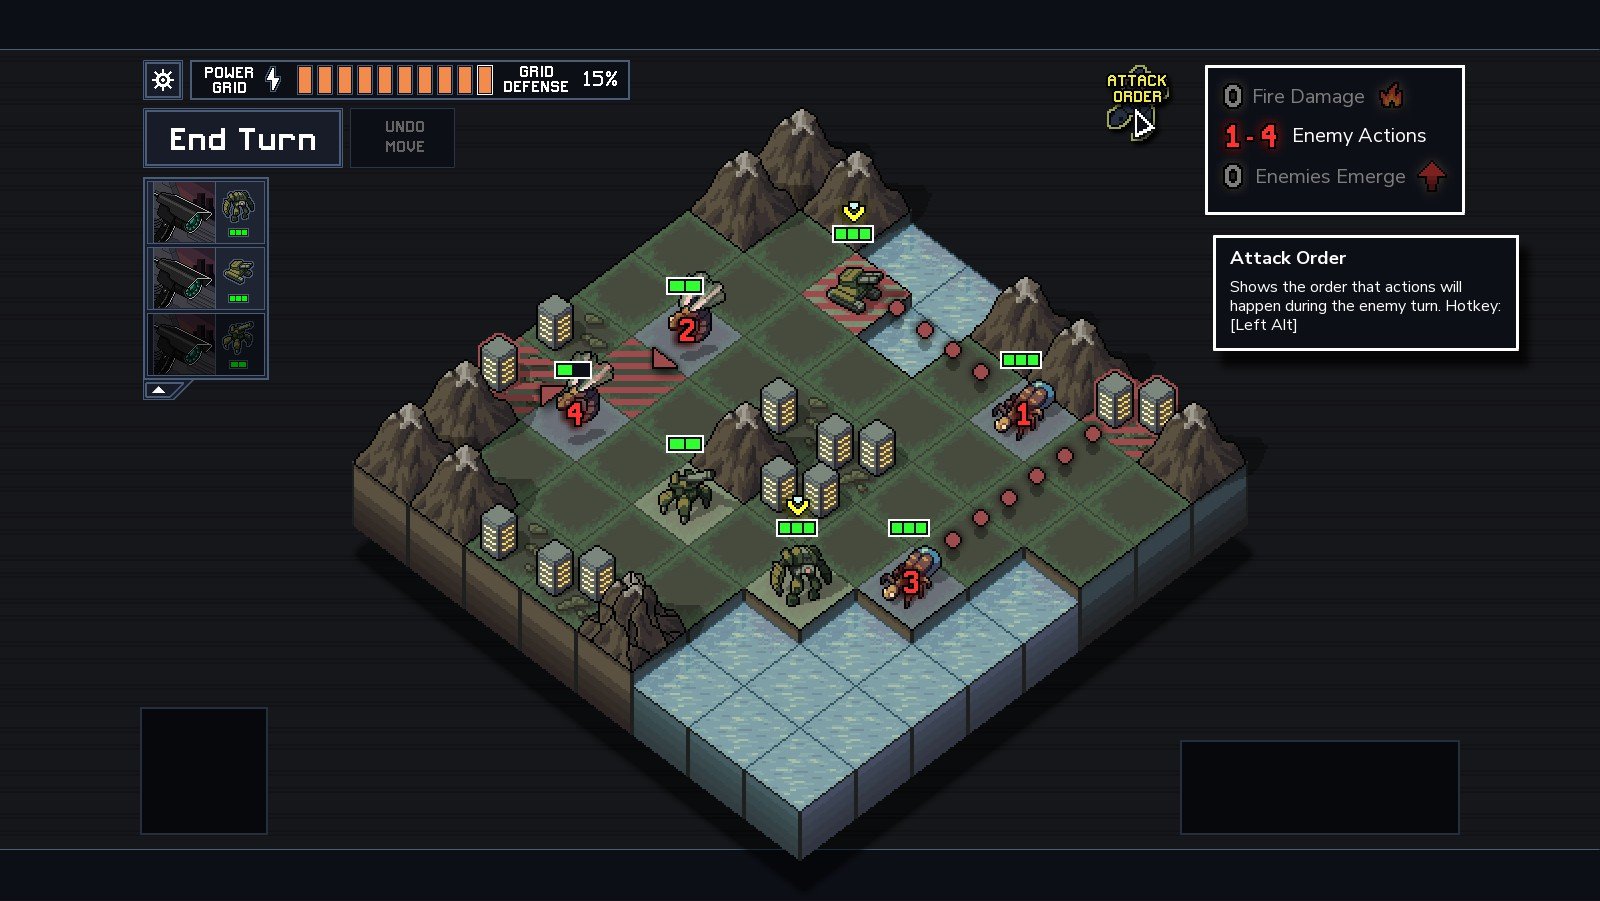 Units fight on an 8 x 8 grid battlefield in Into the Breach